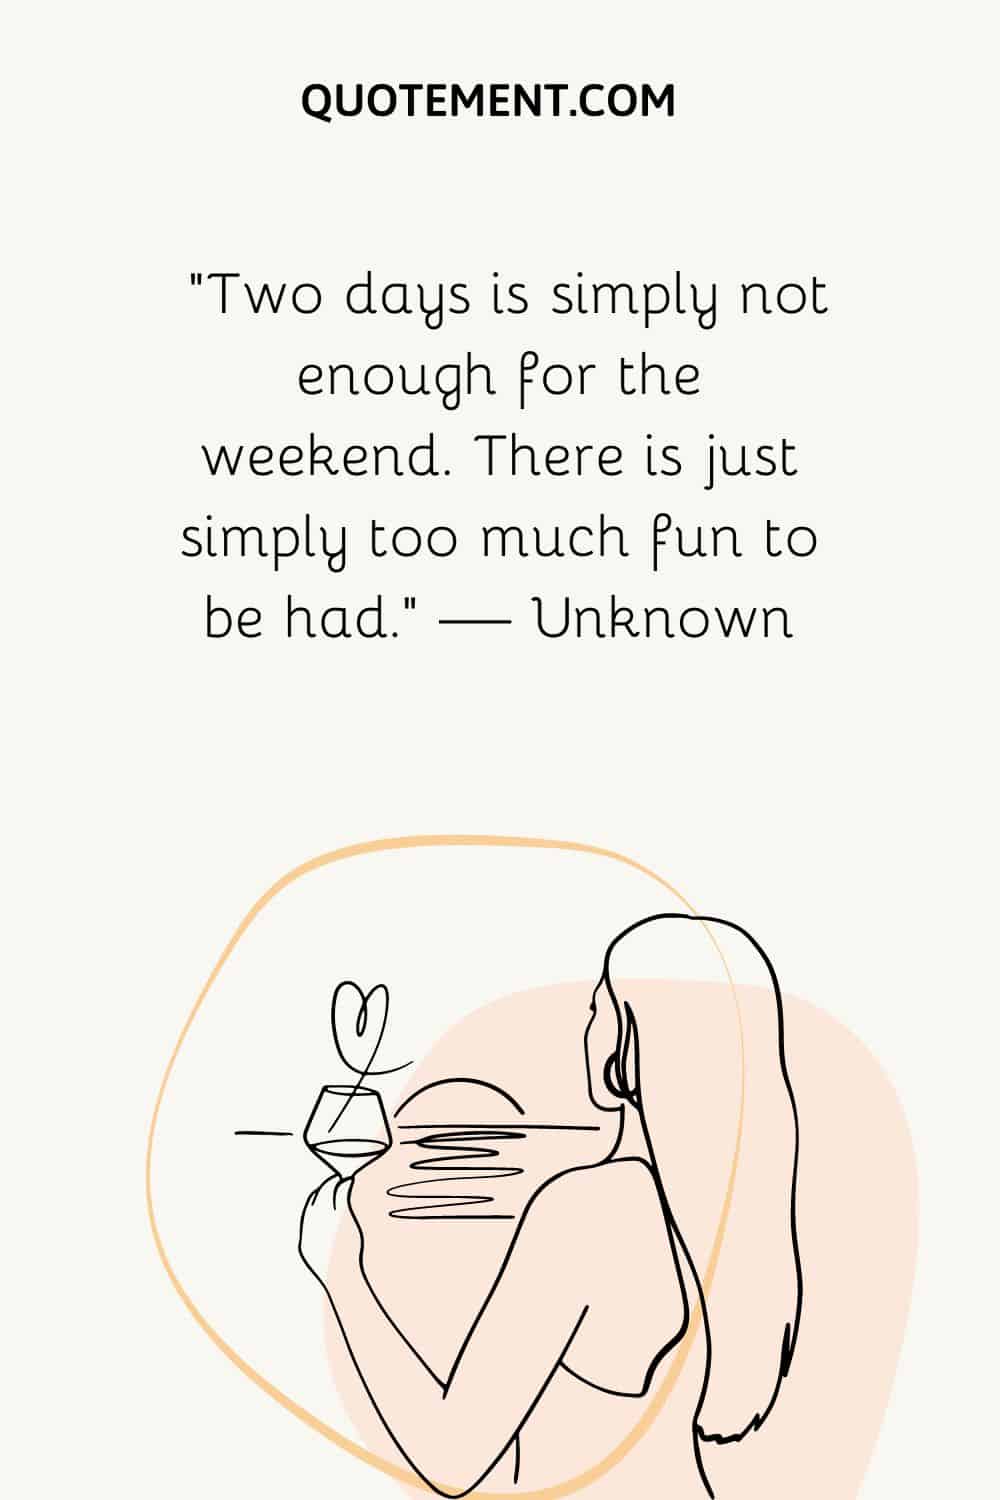 “Two days is simply not enough for the weekend. There is just simply too much fun to be had.” — Unknown